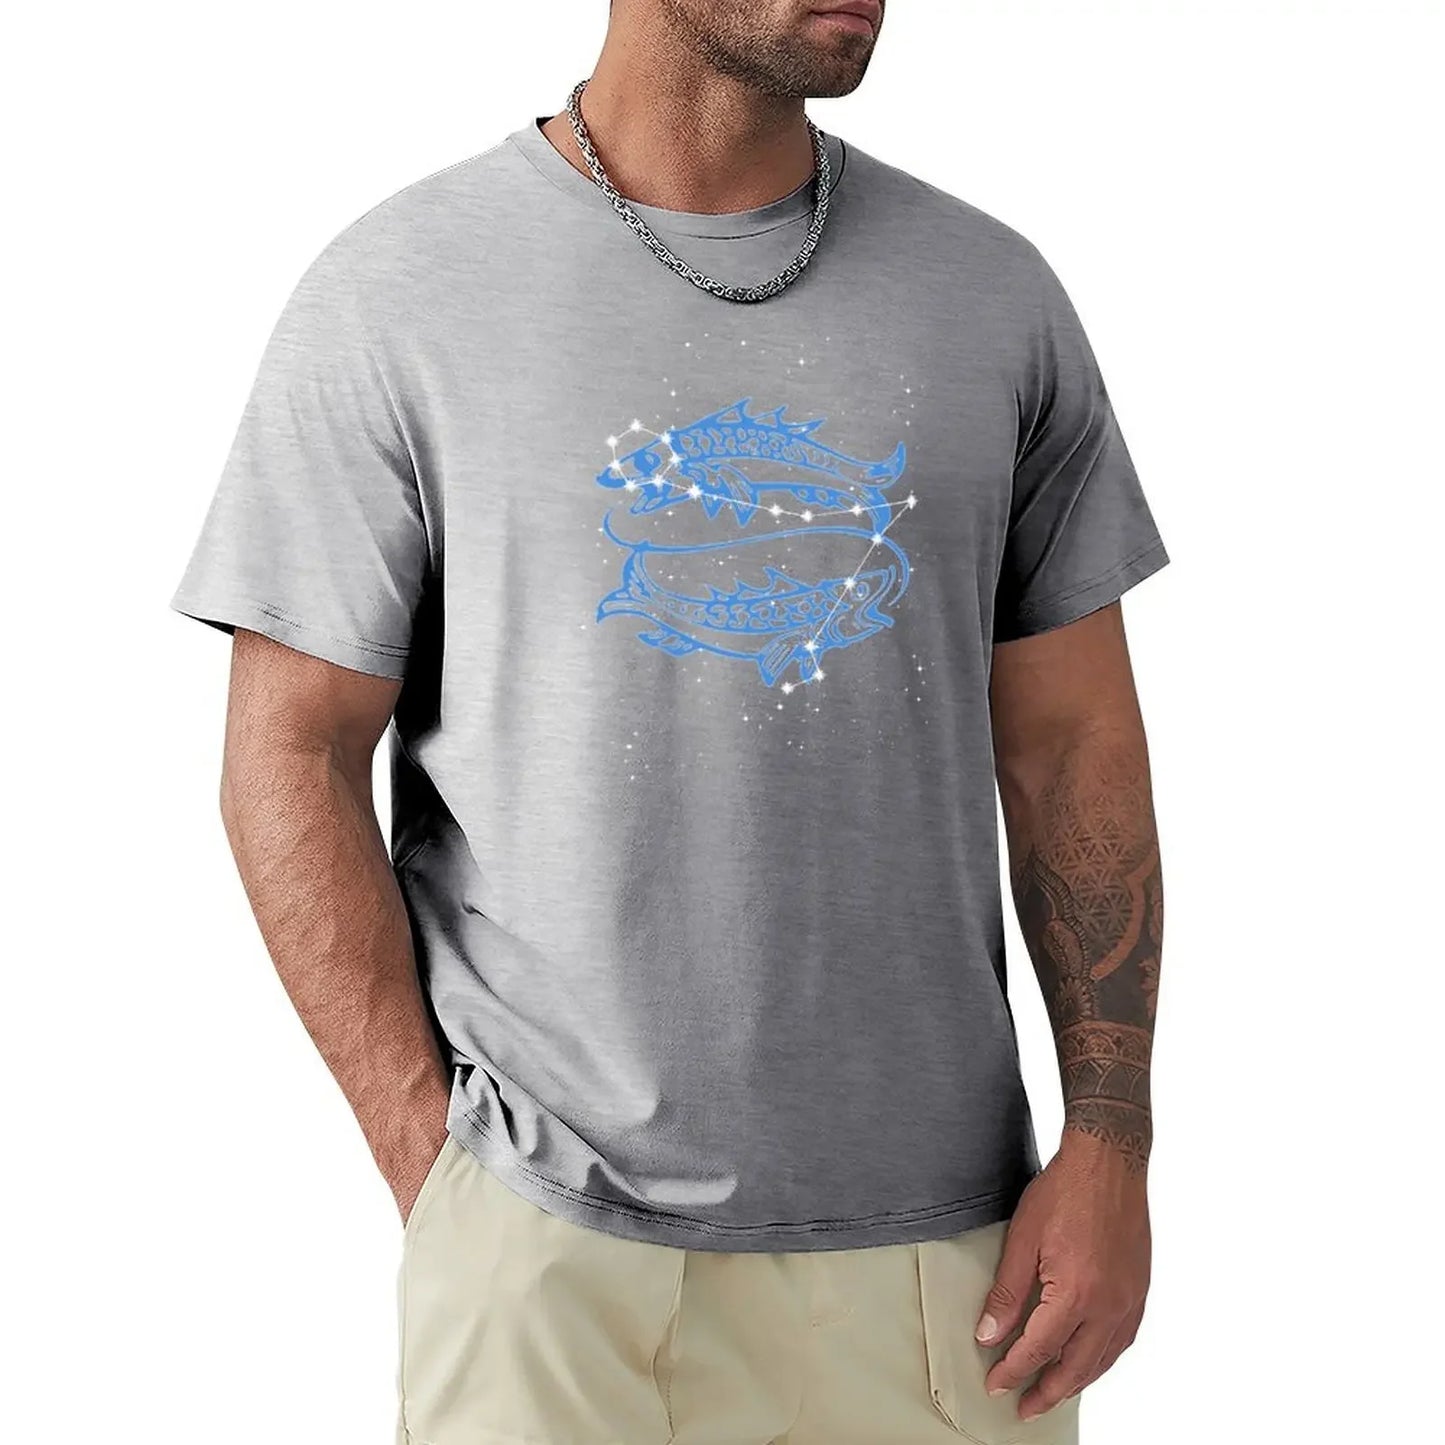 Pisces Constellation and Zodiac Sign T-shirt sports fans blanks t shirt for men